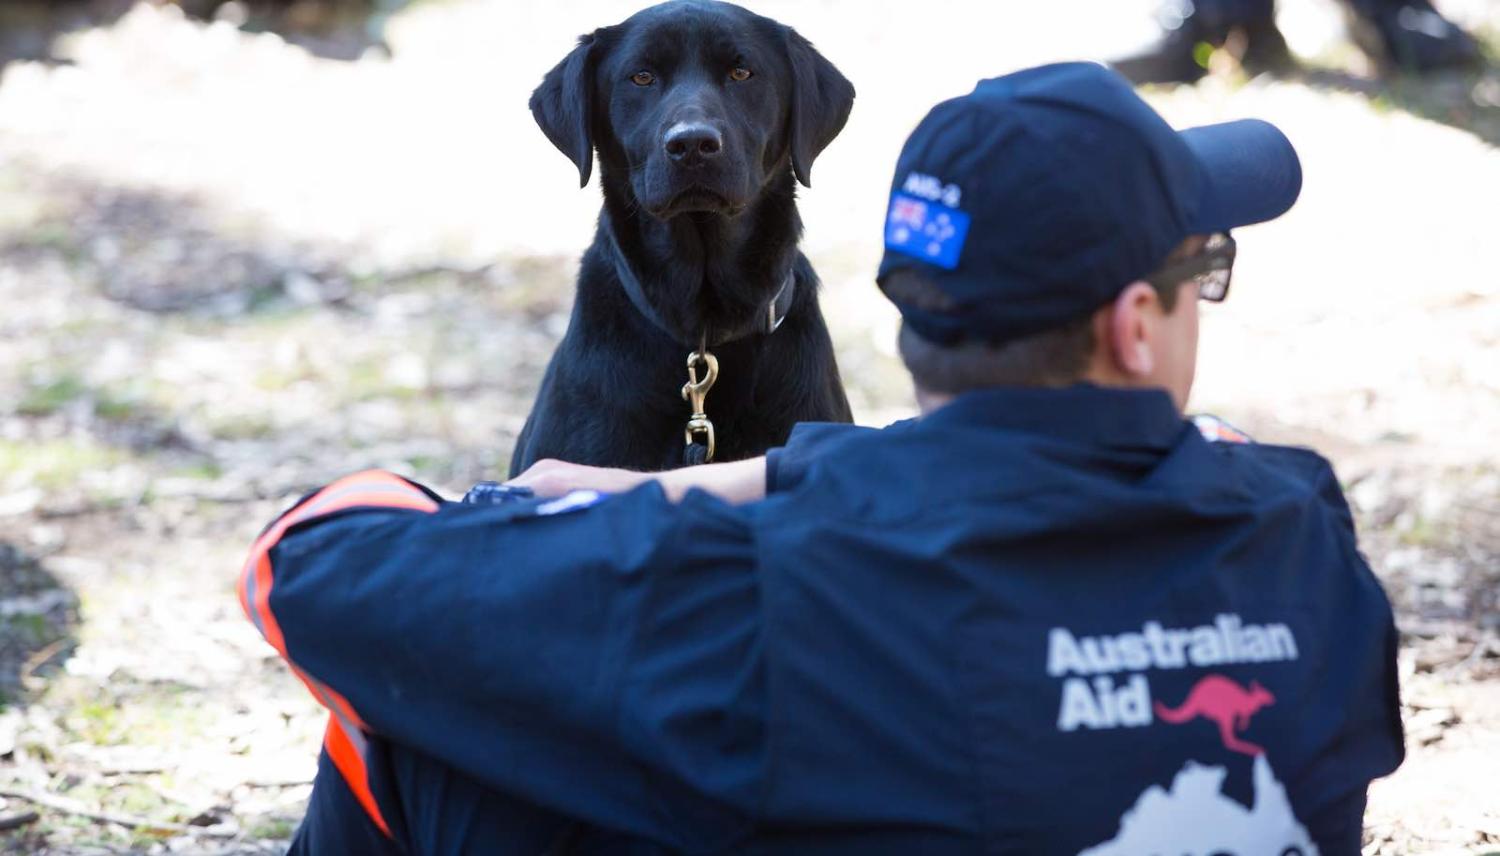 A rescue dog during a disaster response training exercise in Ingleburn, NSW (Photo: Linda Roche/DFAT)